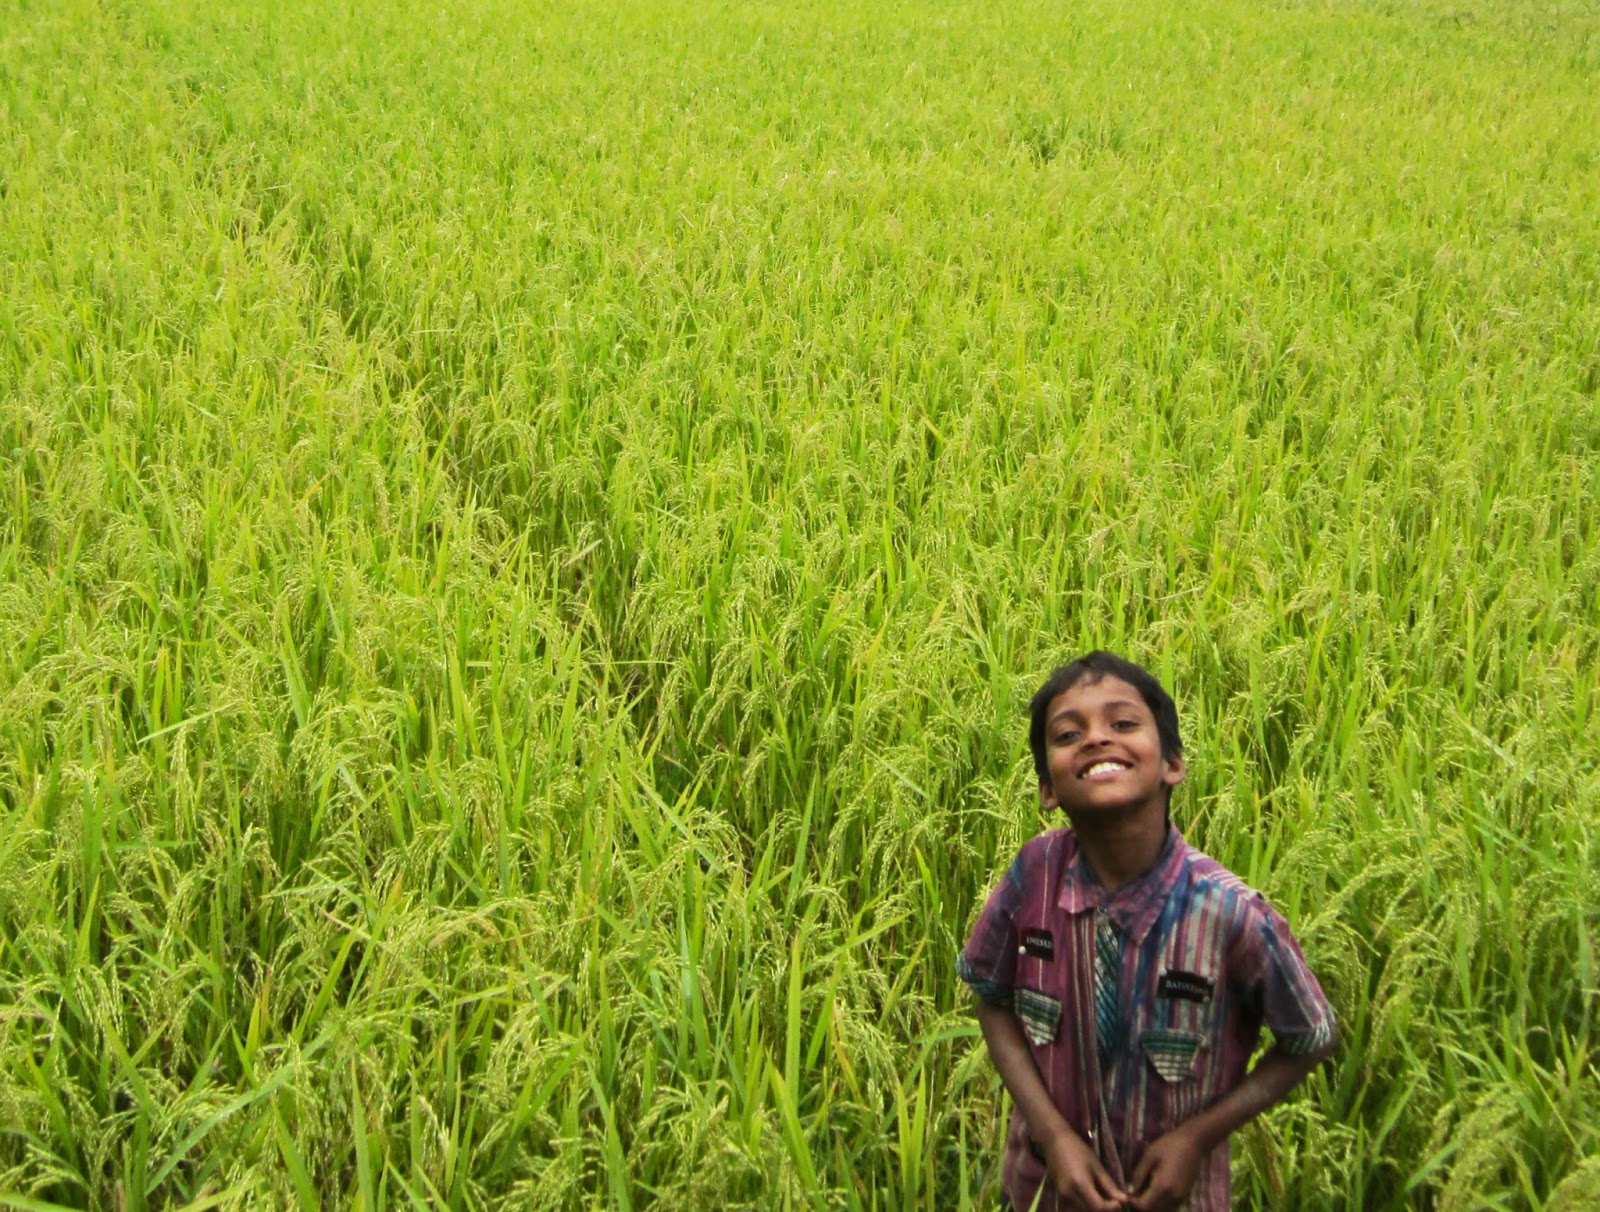 bangladesh wallpaper,people in nature,crop,field,agriculture,grass